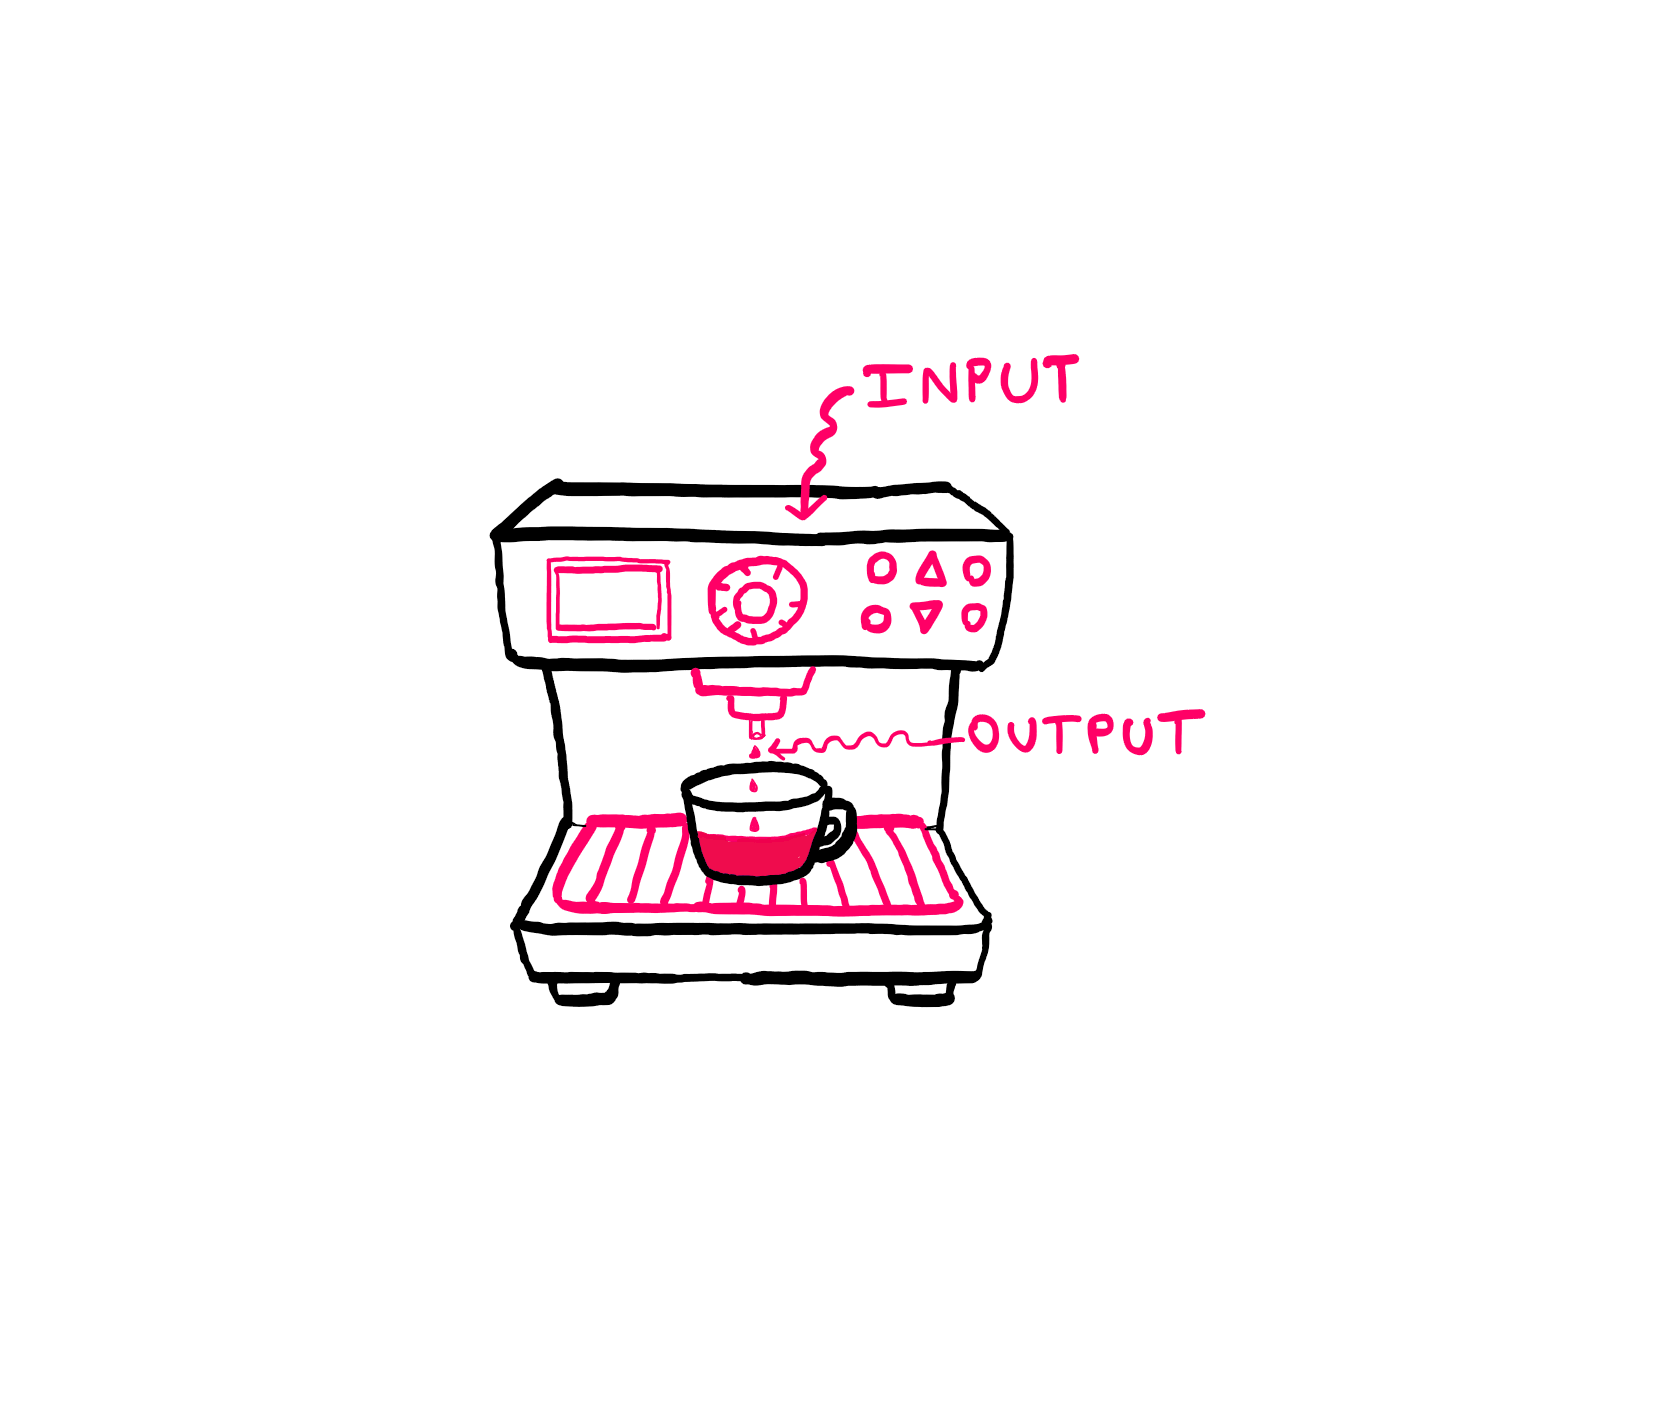 How To Really Understand And Benefit From Abstractions - An illustration of a coffee machine, where Coffee beans, milk, and sugar are provided as input on top, and coffee comes out as output as it drips into the coffee mug.